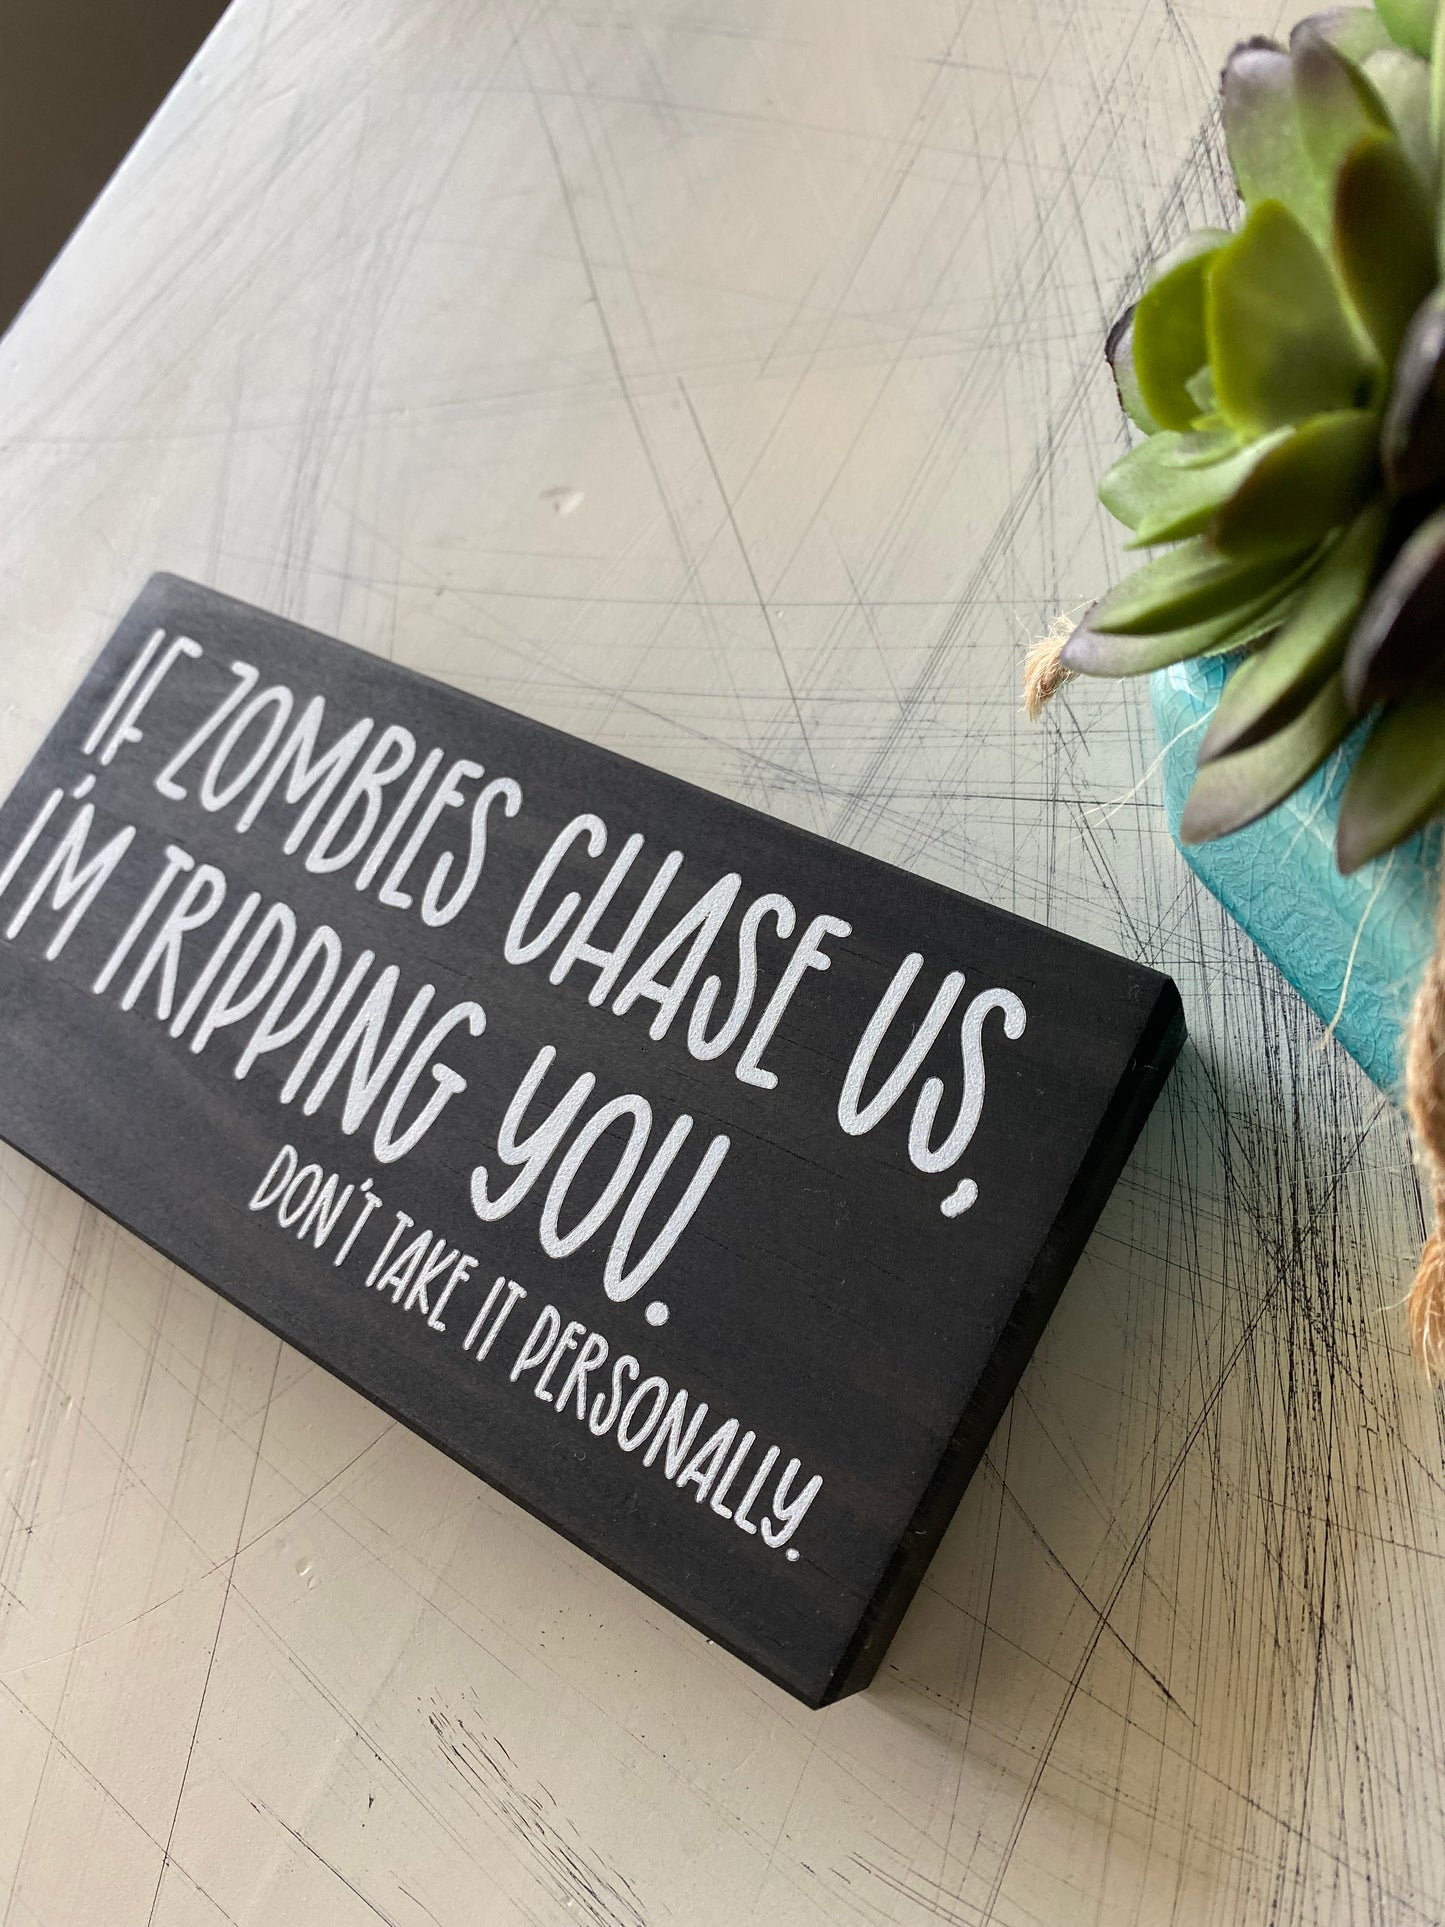 If zombies chase us, I'm tripping you. Don't take it personally. - Handmade mini wood sign